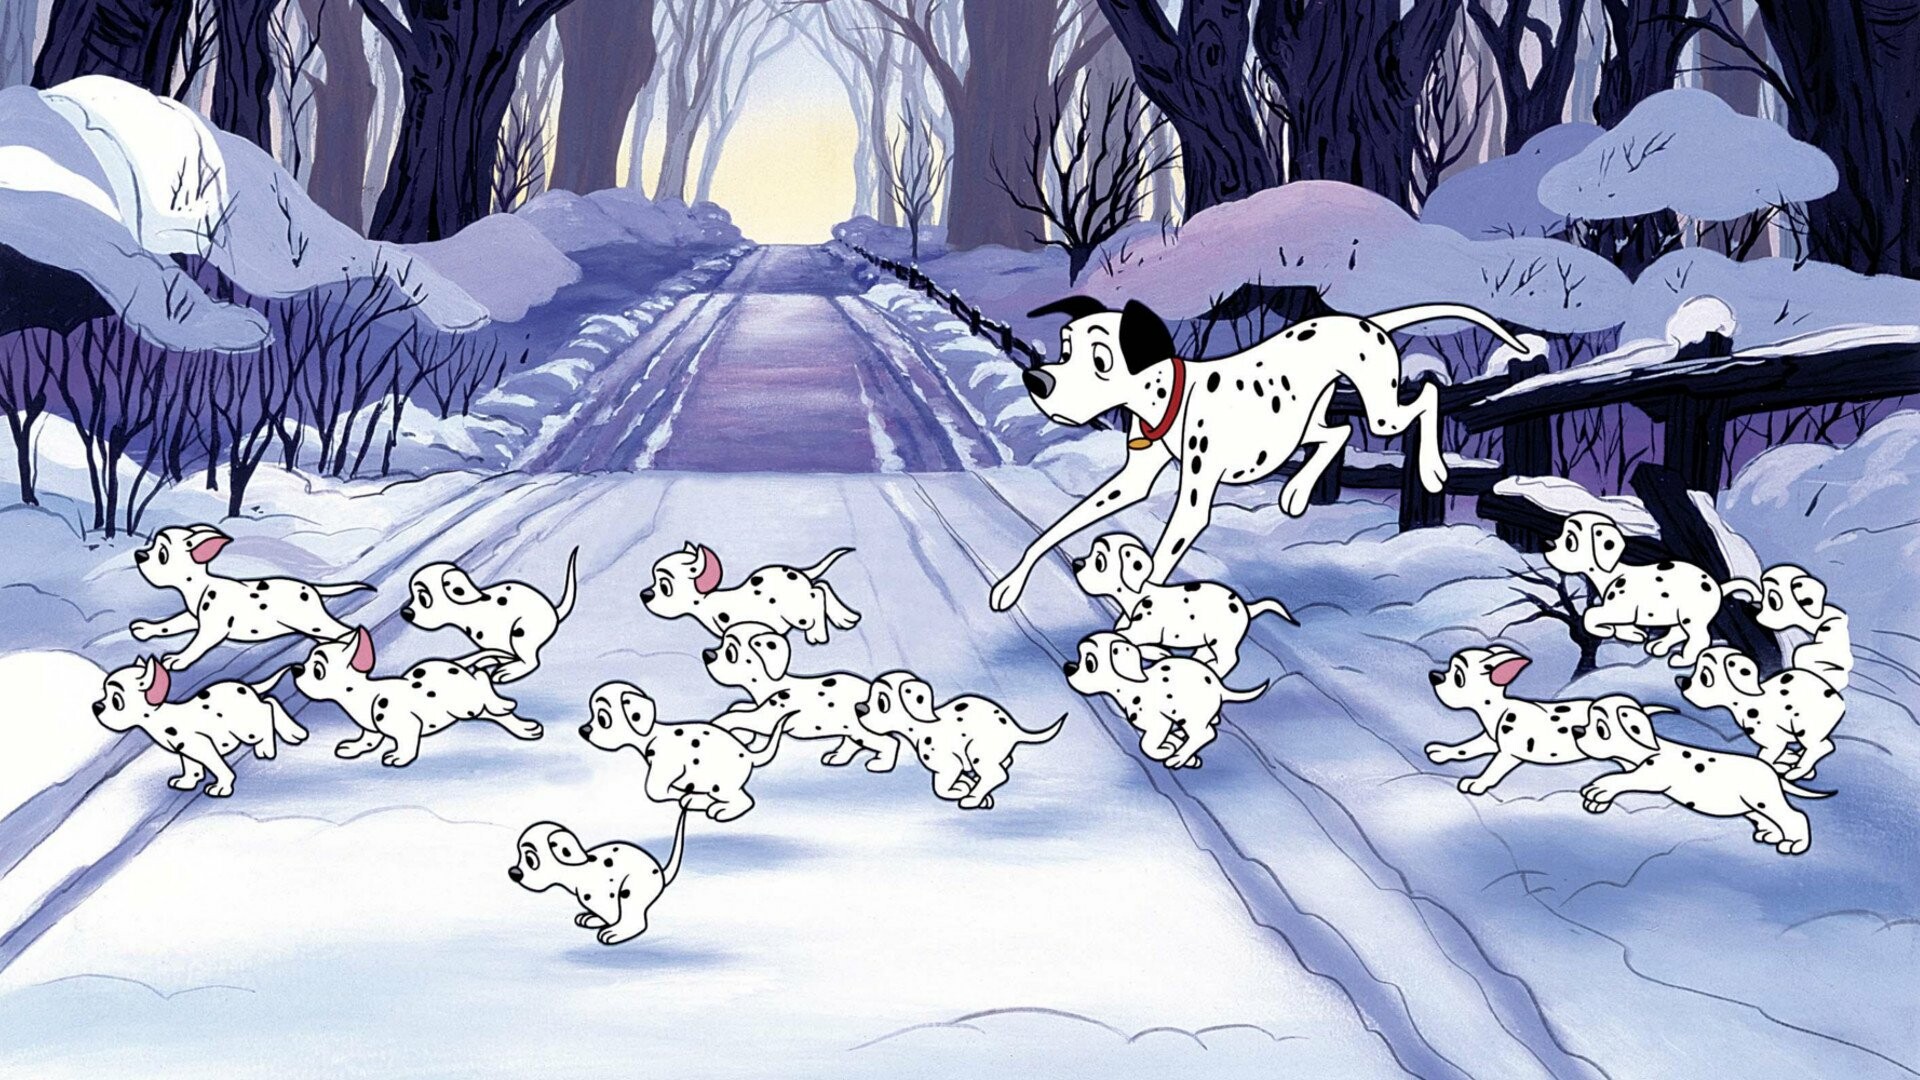 One Hundred and One Dalmatians: Lovable cartoon classic with cute dogs and a mean villain. 1920x1080 Full HD Background.